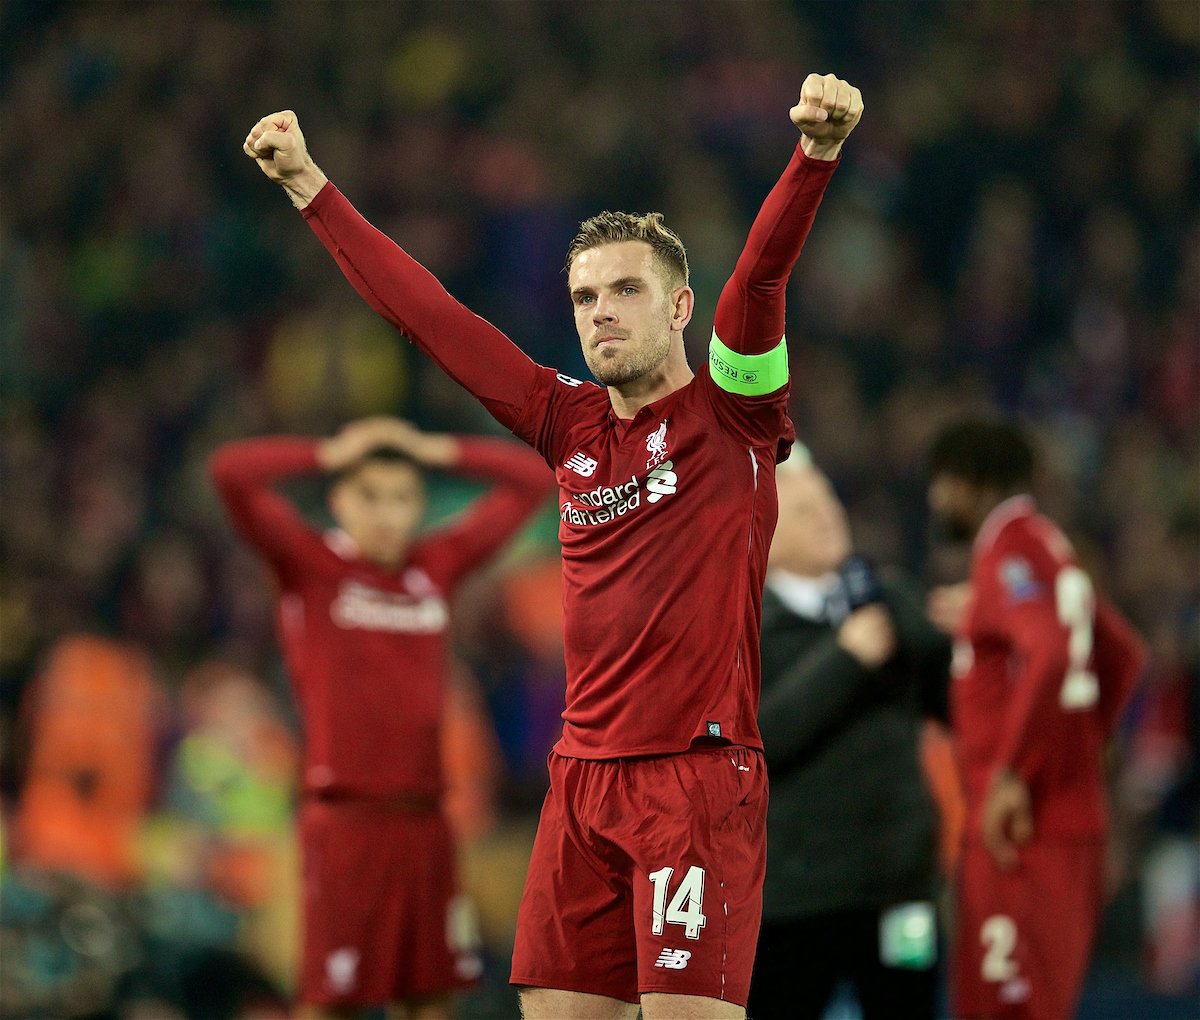 LIVERPOOL, ENGLAND - Tuesday, May 7, 2019: Liverpool's captain Jordan Henderson celebrates the 4-0 victory (4-3 on aggregate) over FC Barcelona after the UEFA Champions League Semi-Final 2nd Leg match between Liverpool FC and FC Barcelona at Anfield. (Pic by David Rawcliffe/Propaganda)